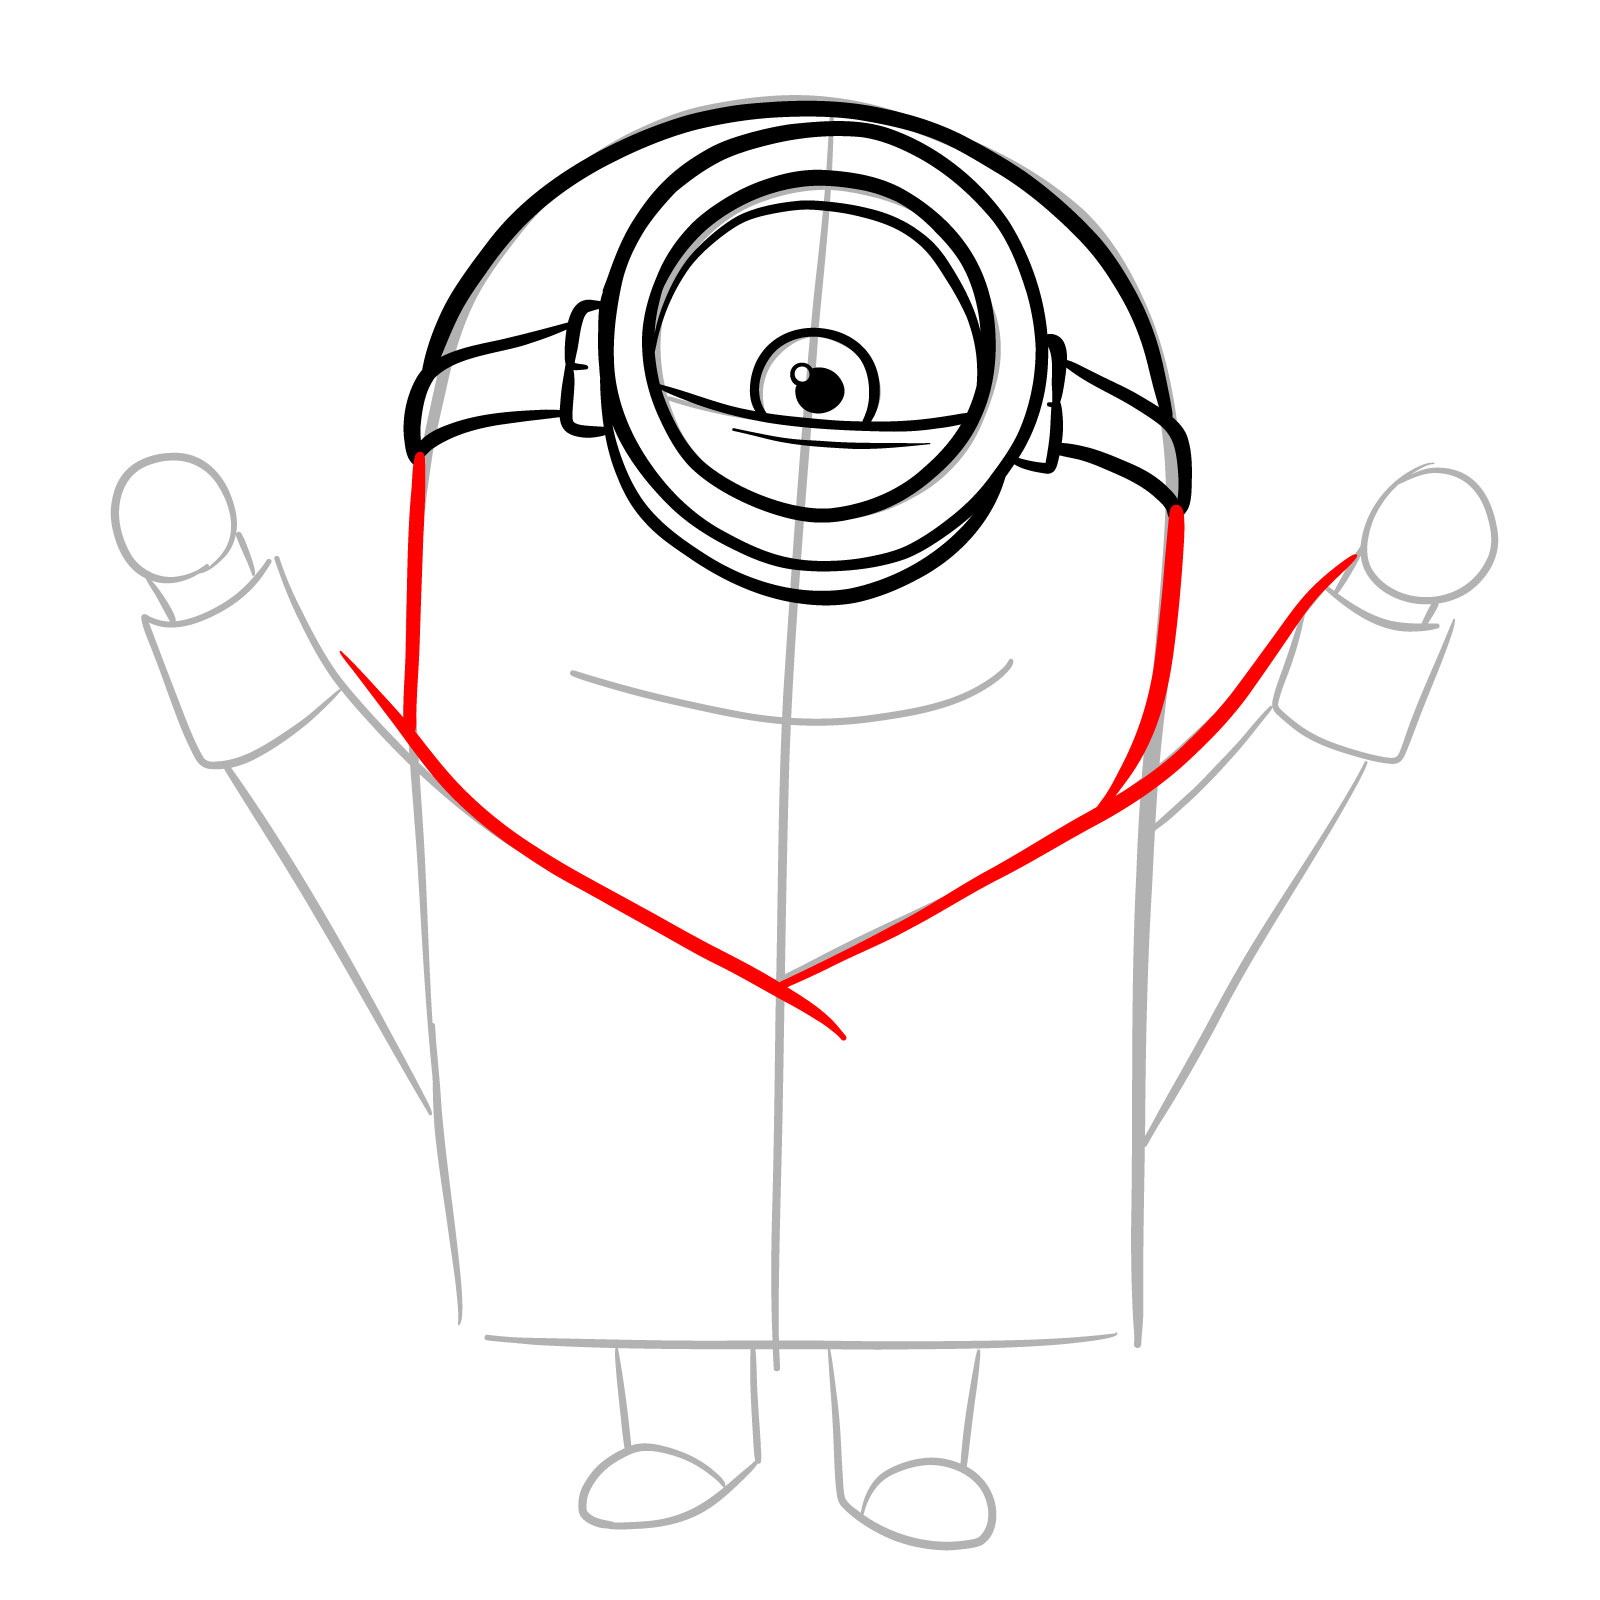 How to Draw a Vampire Minion - step 10